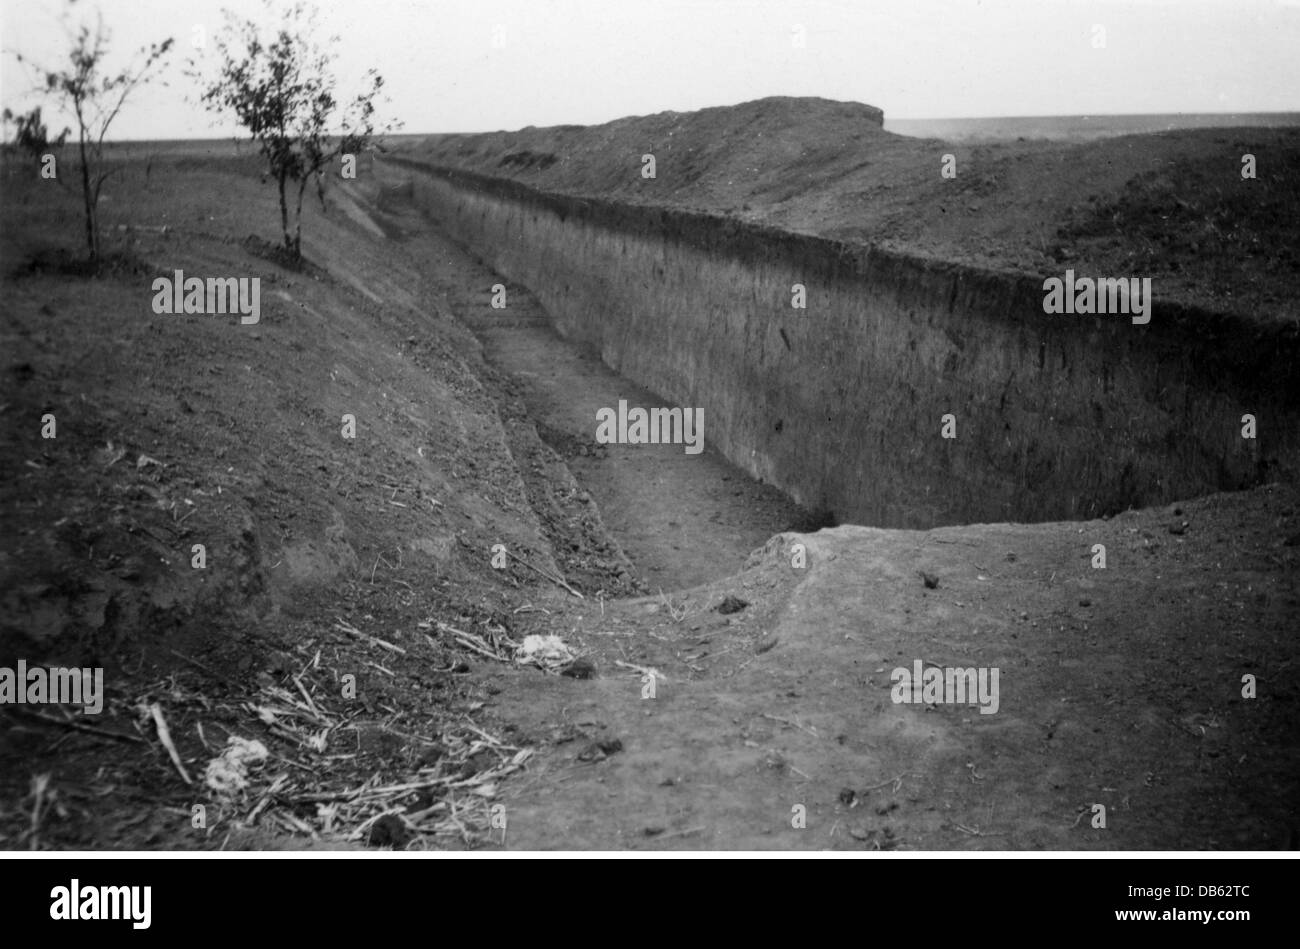 Second World War / WWII, Soviet Union, Soviet antitank ditch, Army Group South, Ukraine, summer 1941, Additional-Rights-Clearences-Not Available Stock Photo